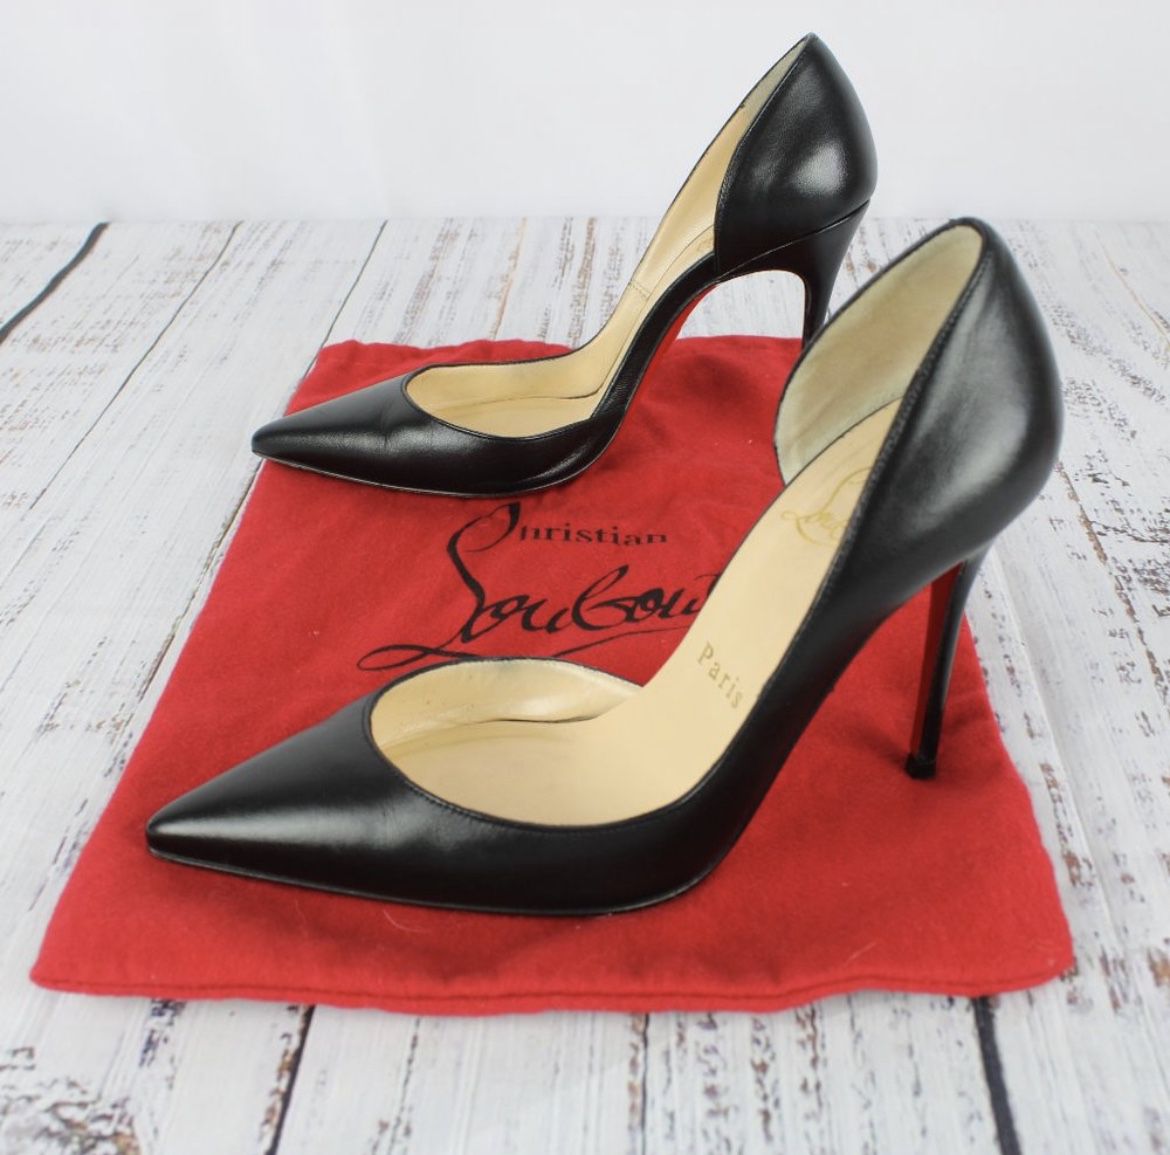 Christian Louboutin pre-owned black heeled pumps